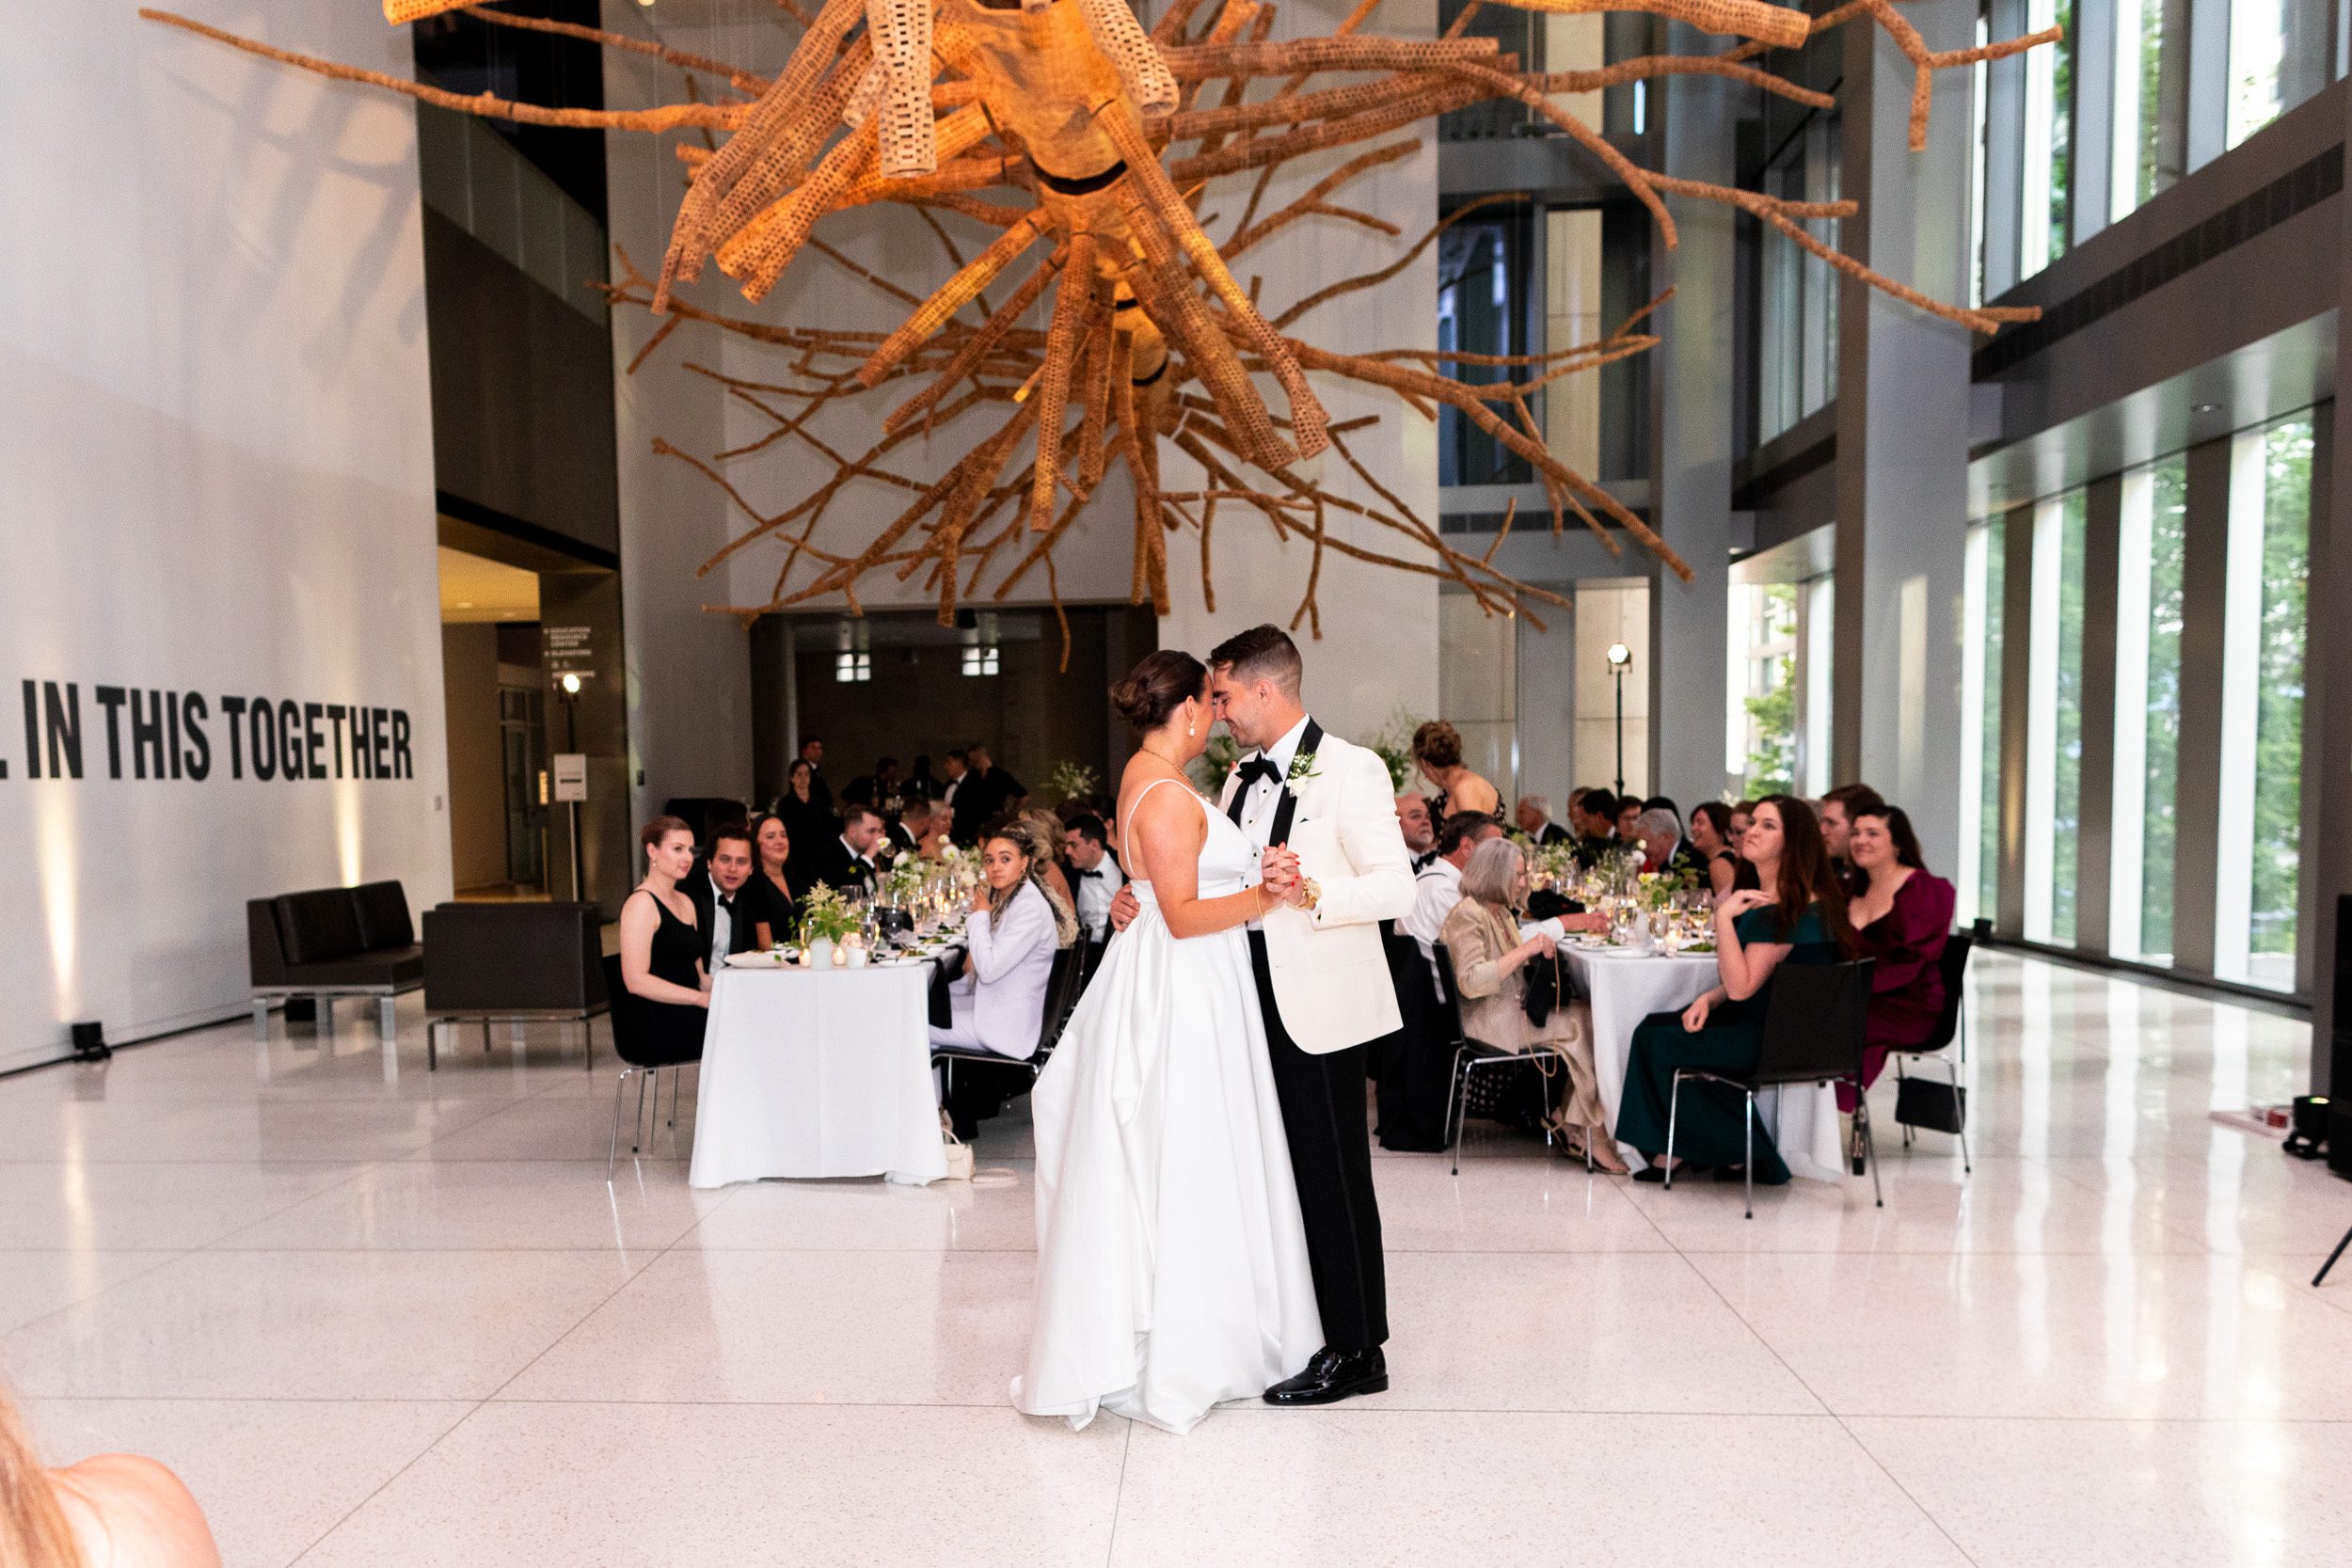 Bride and groom, sharing their first dance underneath the tree sculpture at the Seattle Art Museum during their downtown Seattle wedding